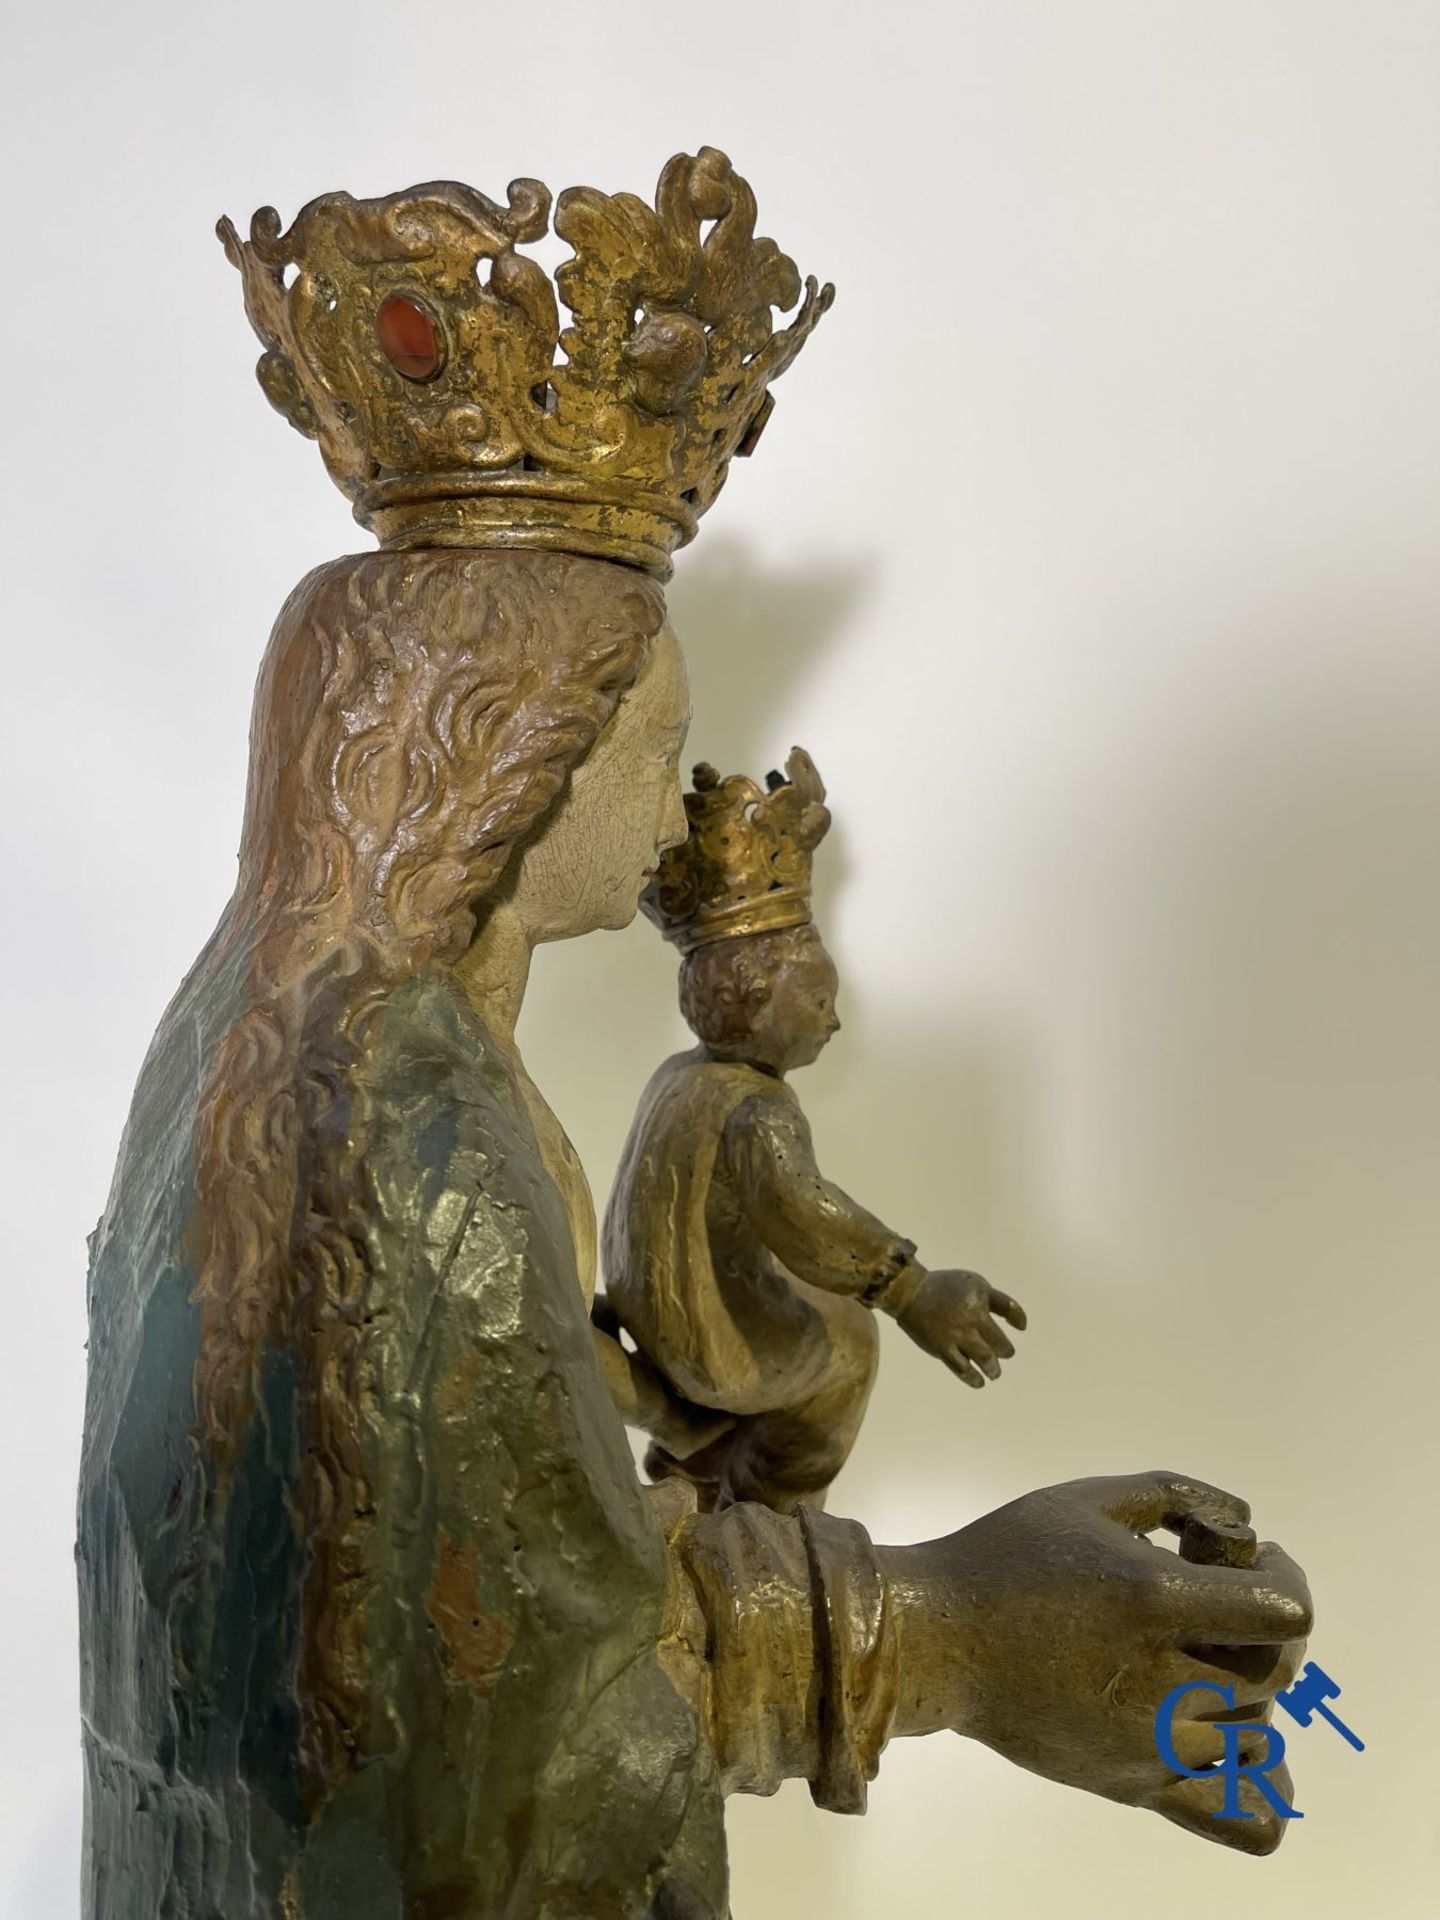 Wooden polychrome Baroque sculpture of Mary with child. The Crown inlaid with an amber-like rock. - Image 19 of 30